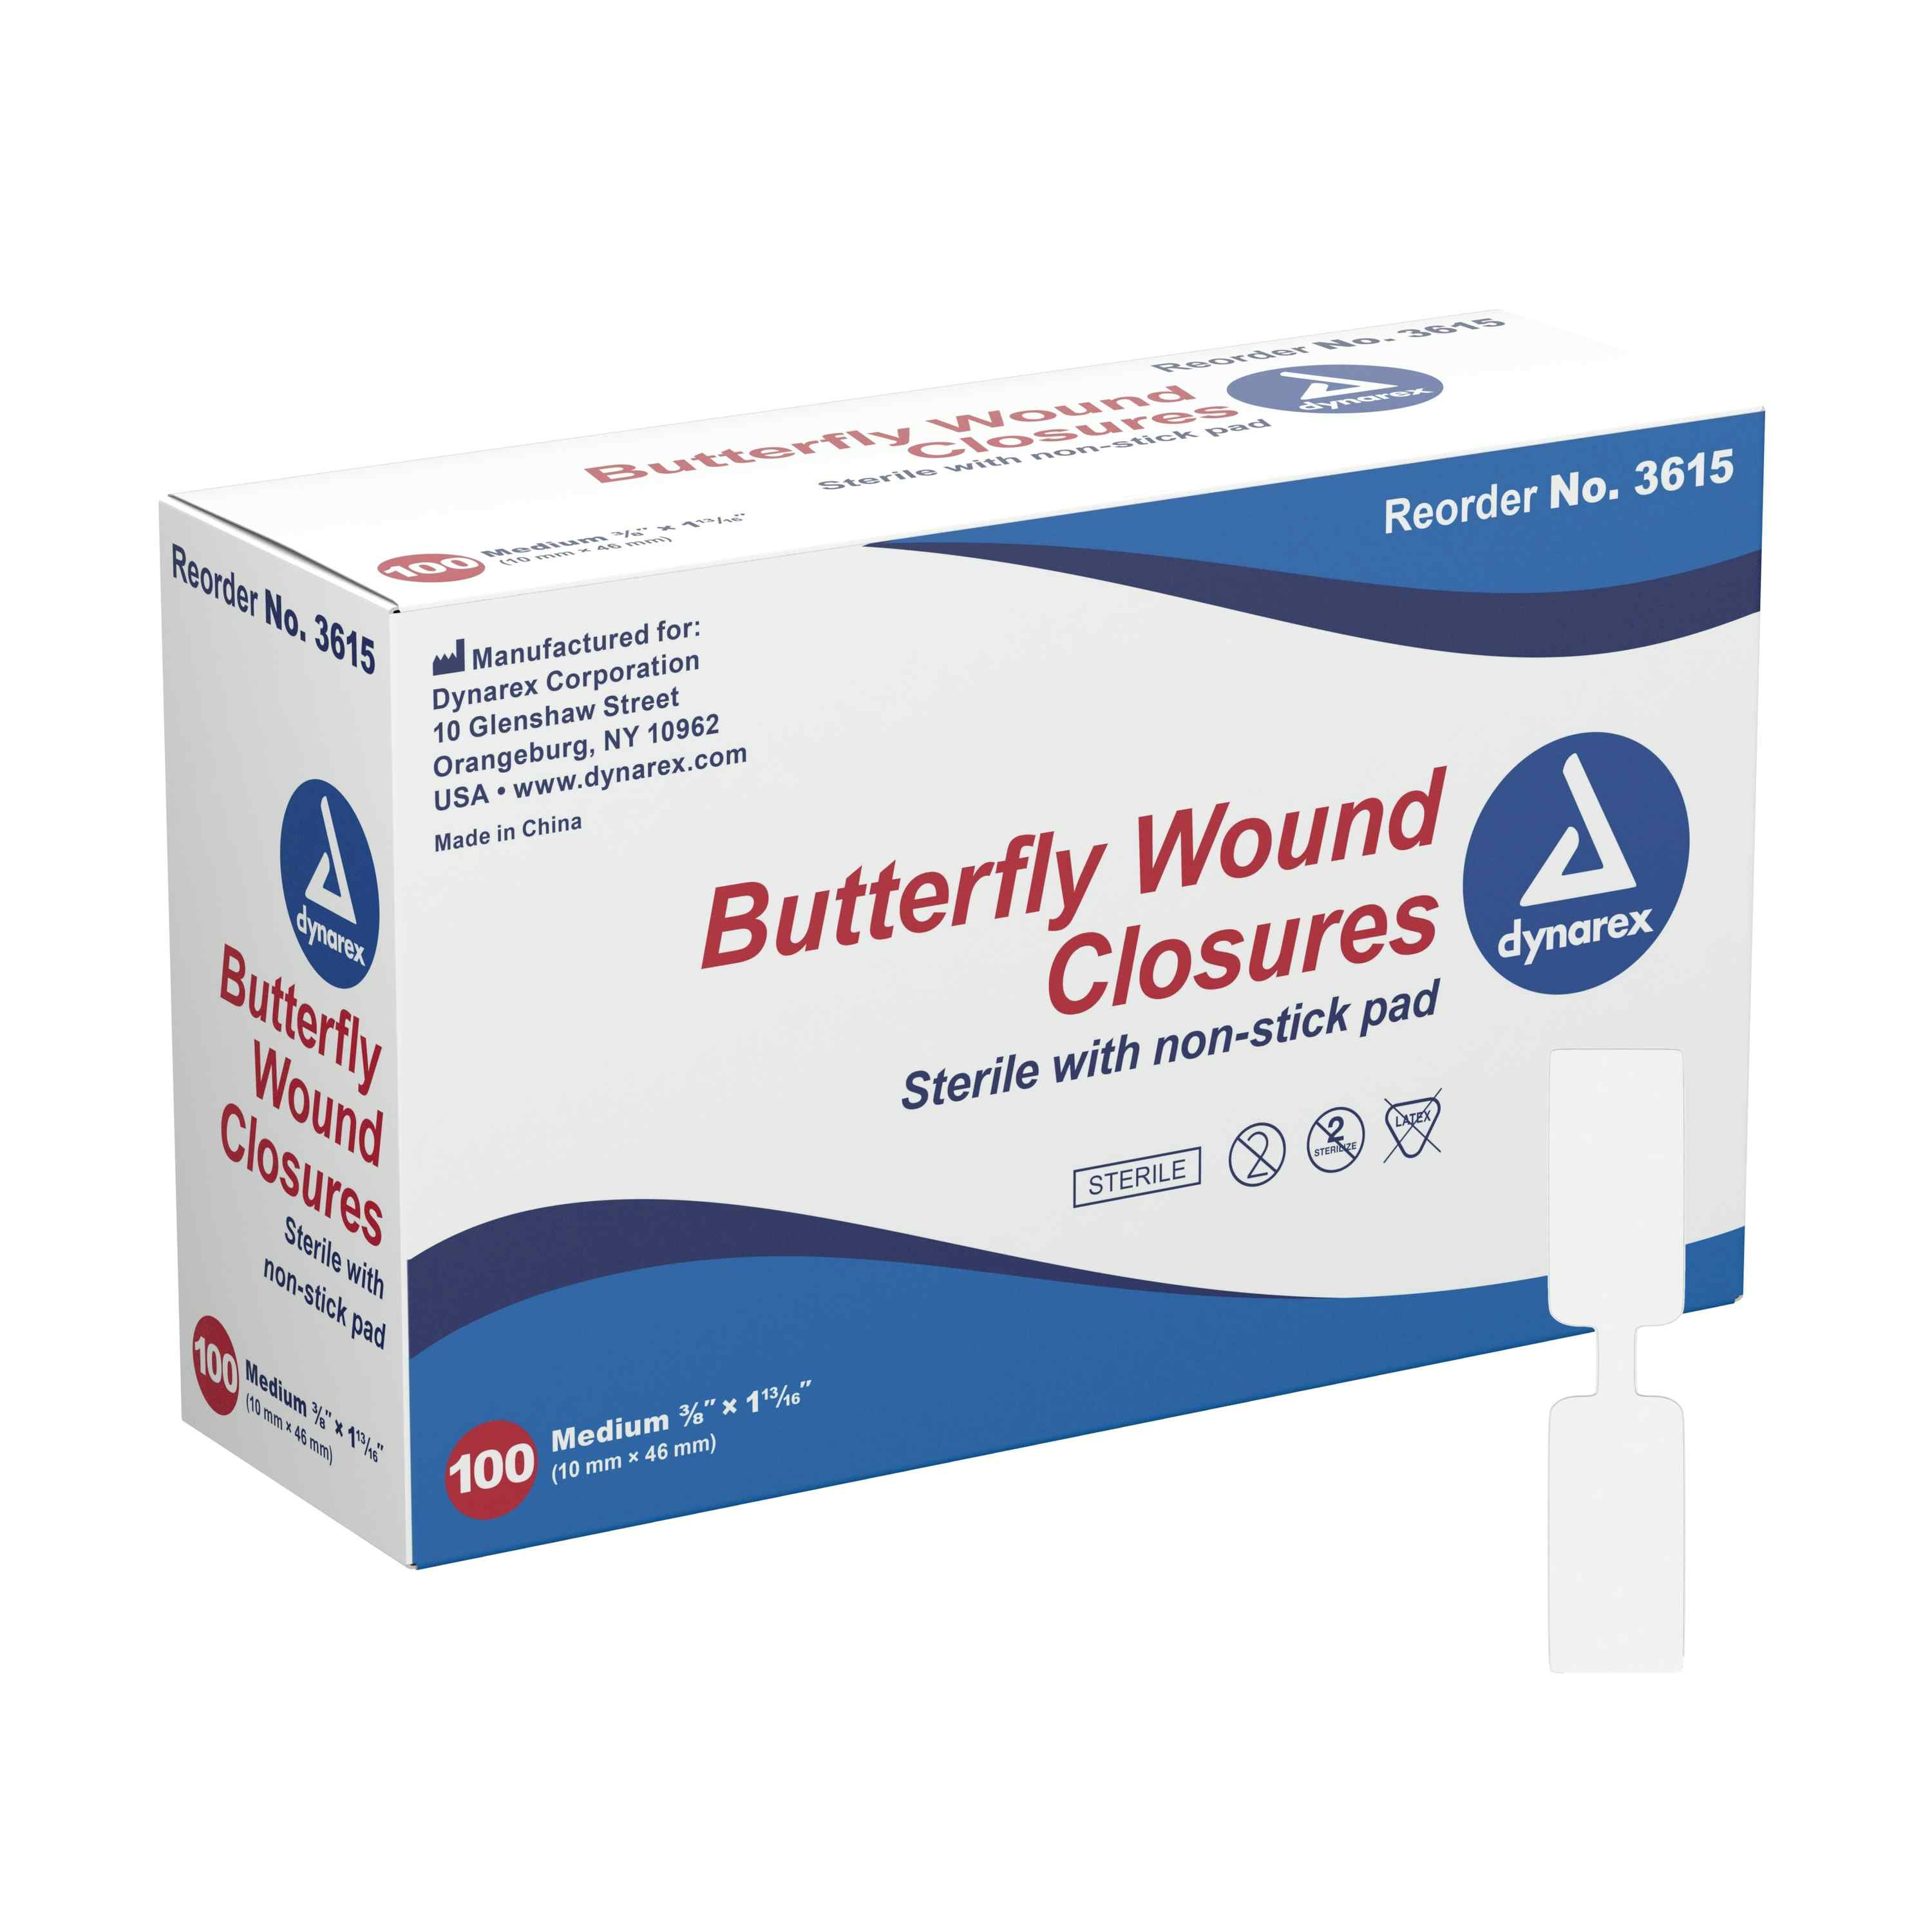 Dynarex Sterile with Non-Stick Pad Butterfly Wound Closures, 3/8 X 1-13/16", 3615, Box of 100